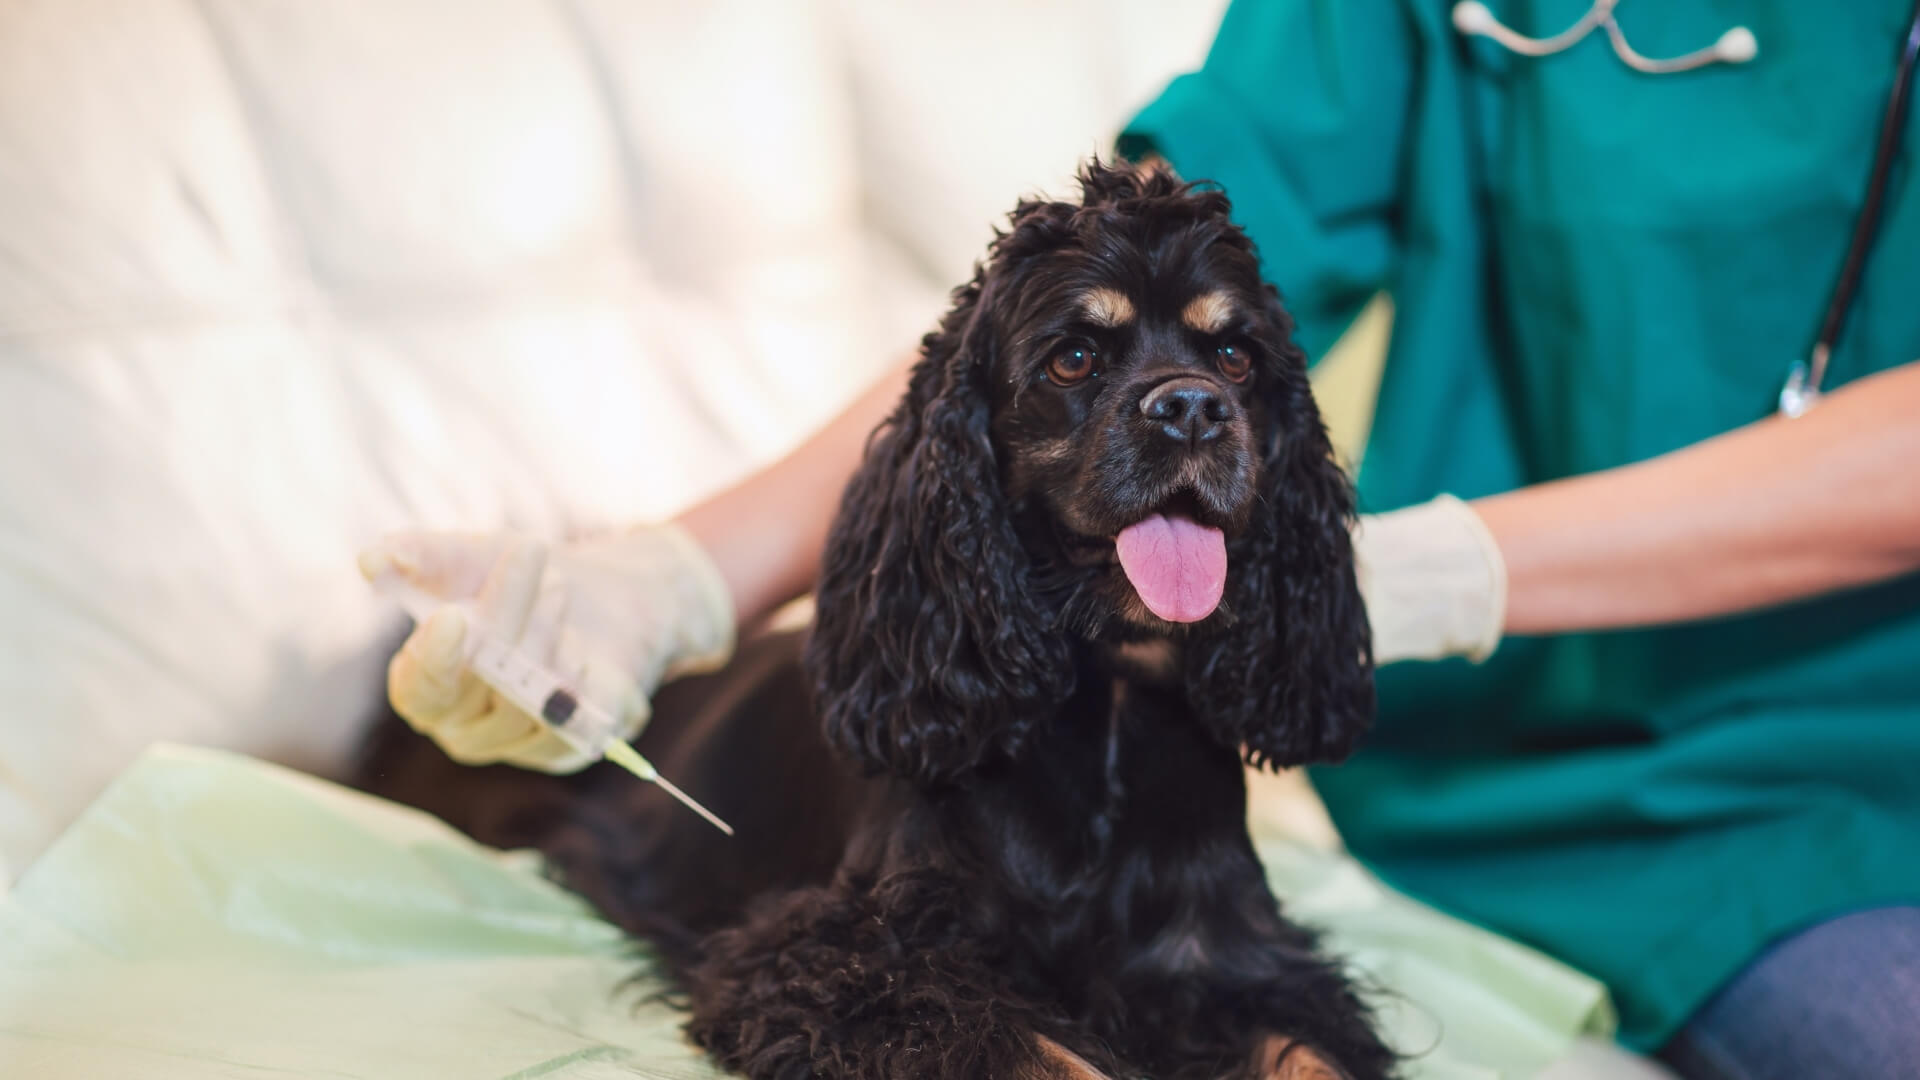 A Black Fluffy Dog Getting Vaccinated